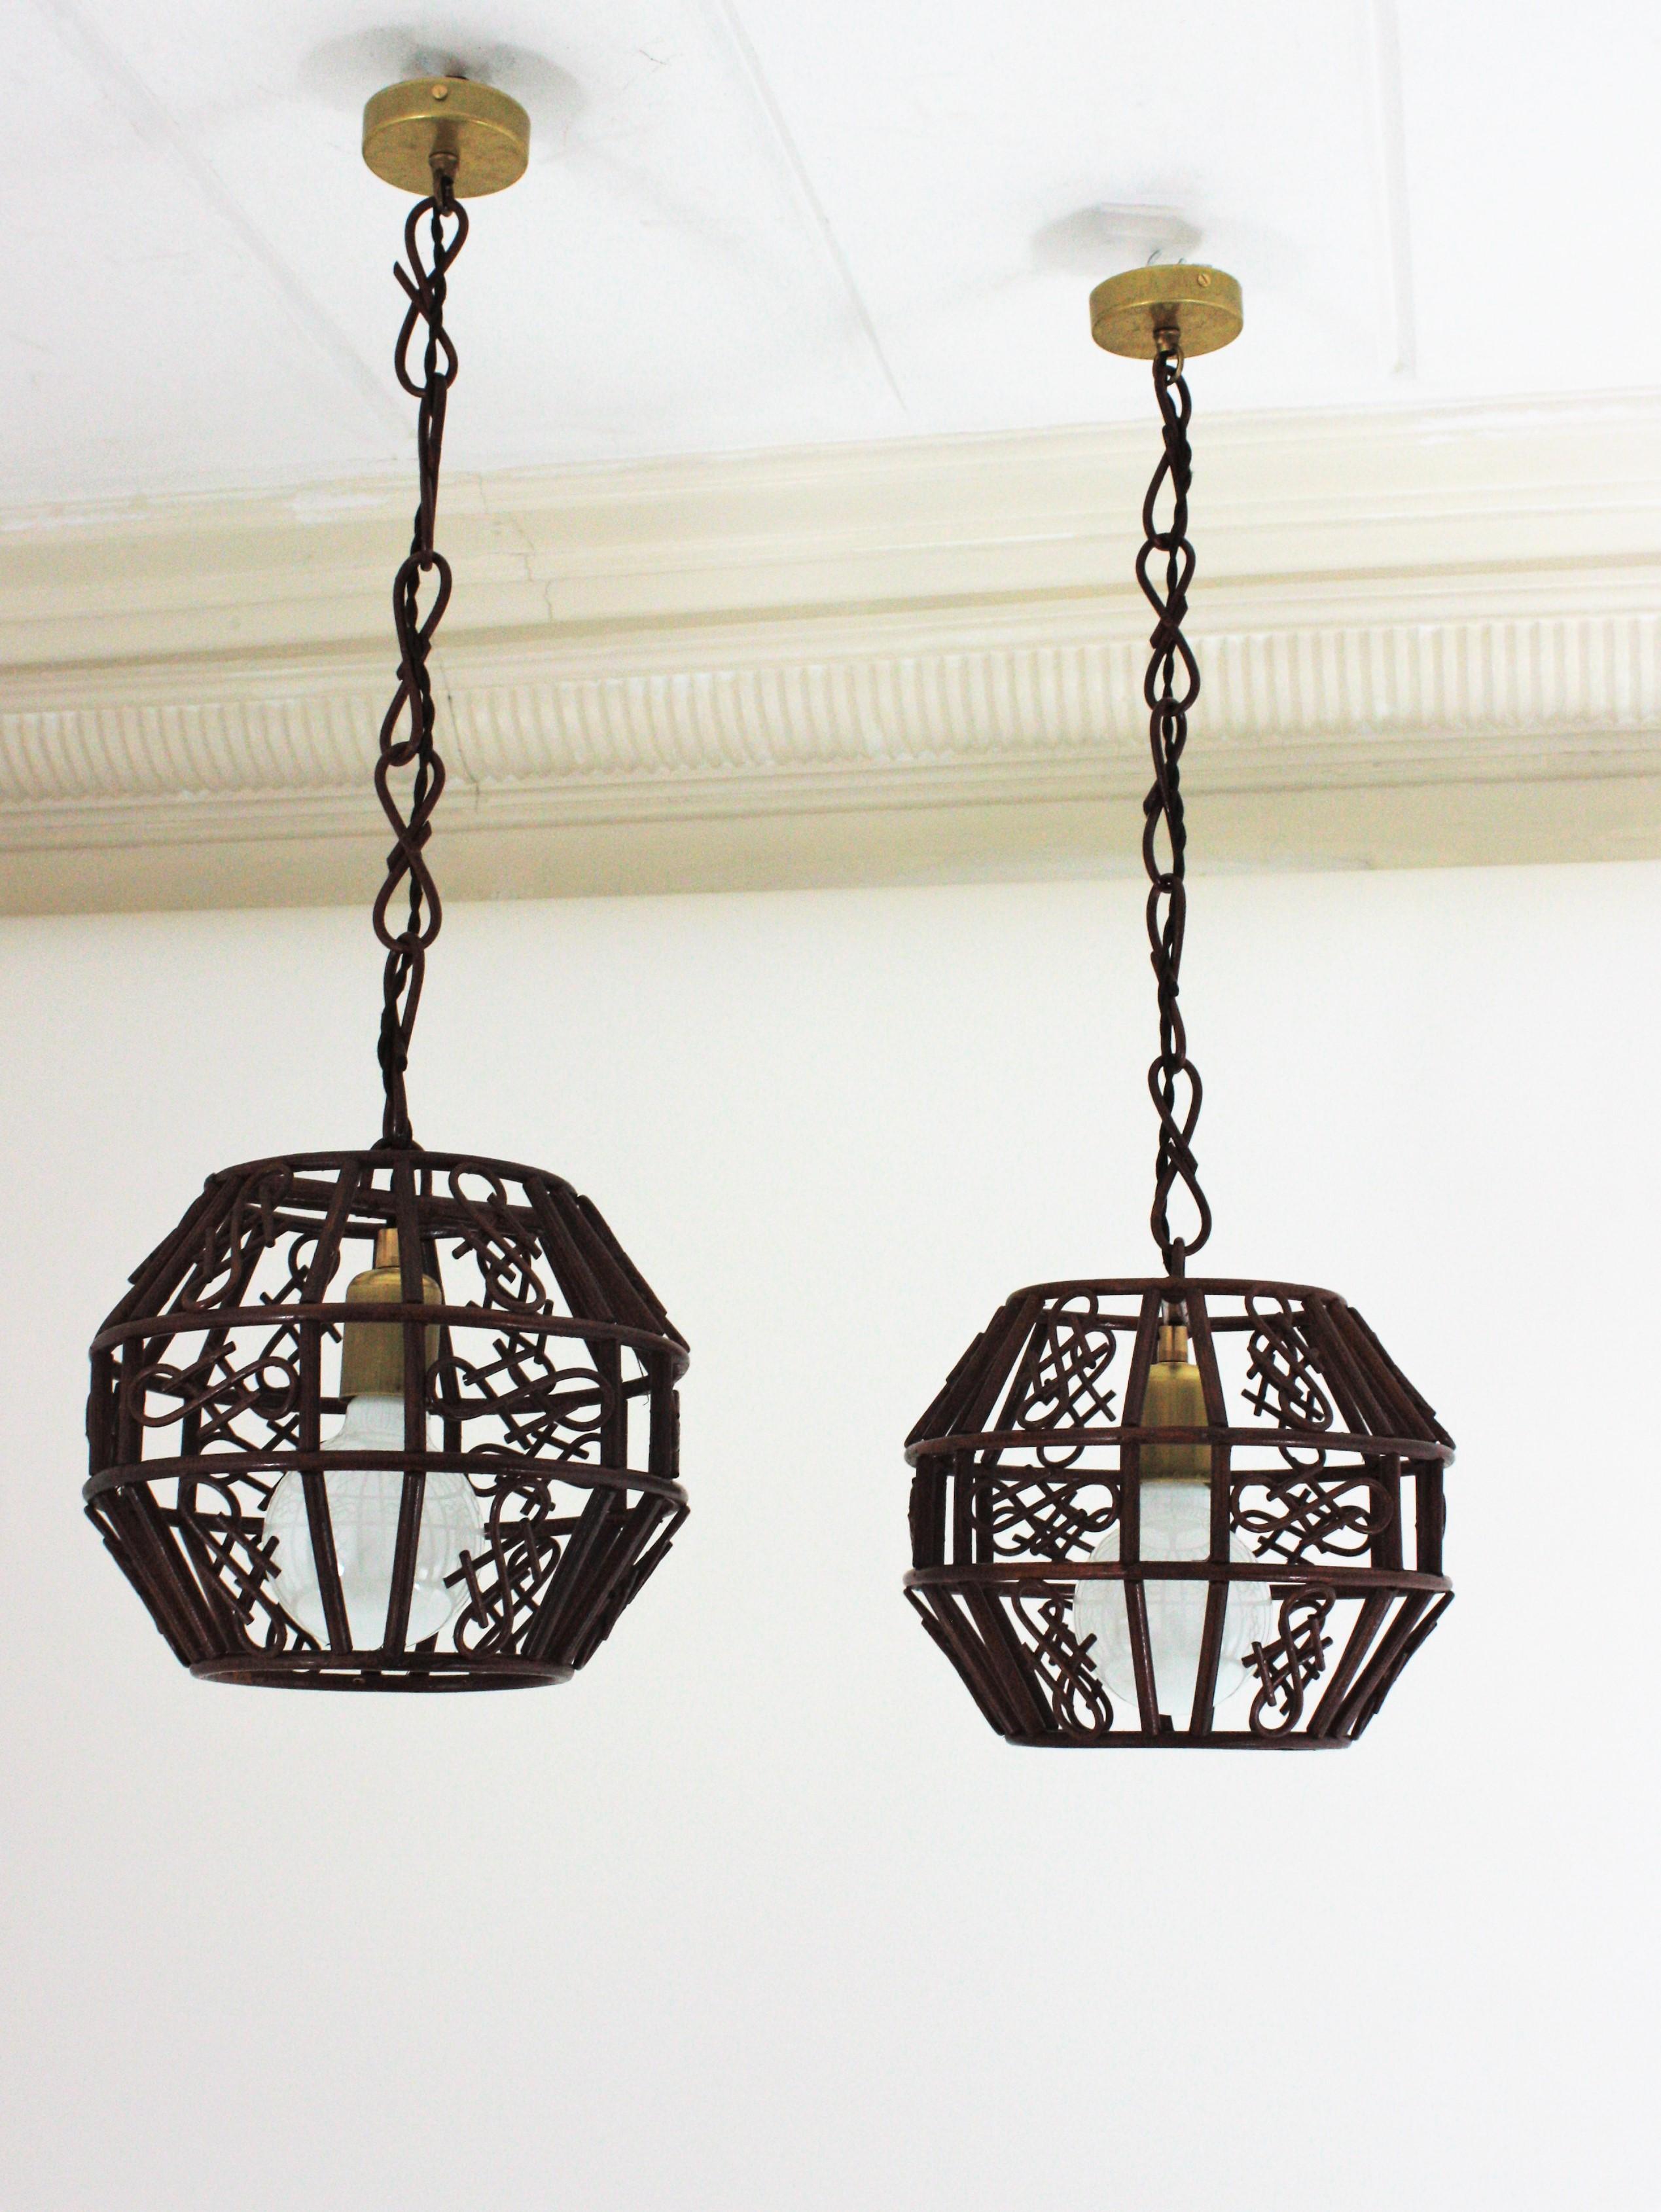 Pair of French Rattan Pendant Lights or Lanterns, 1960s For Sale 3